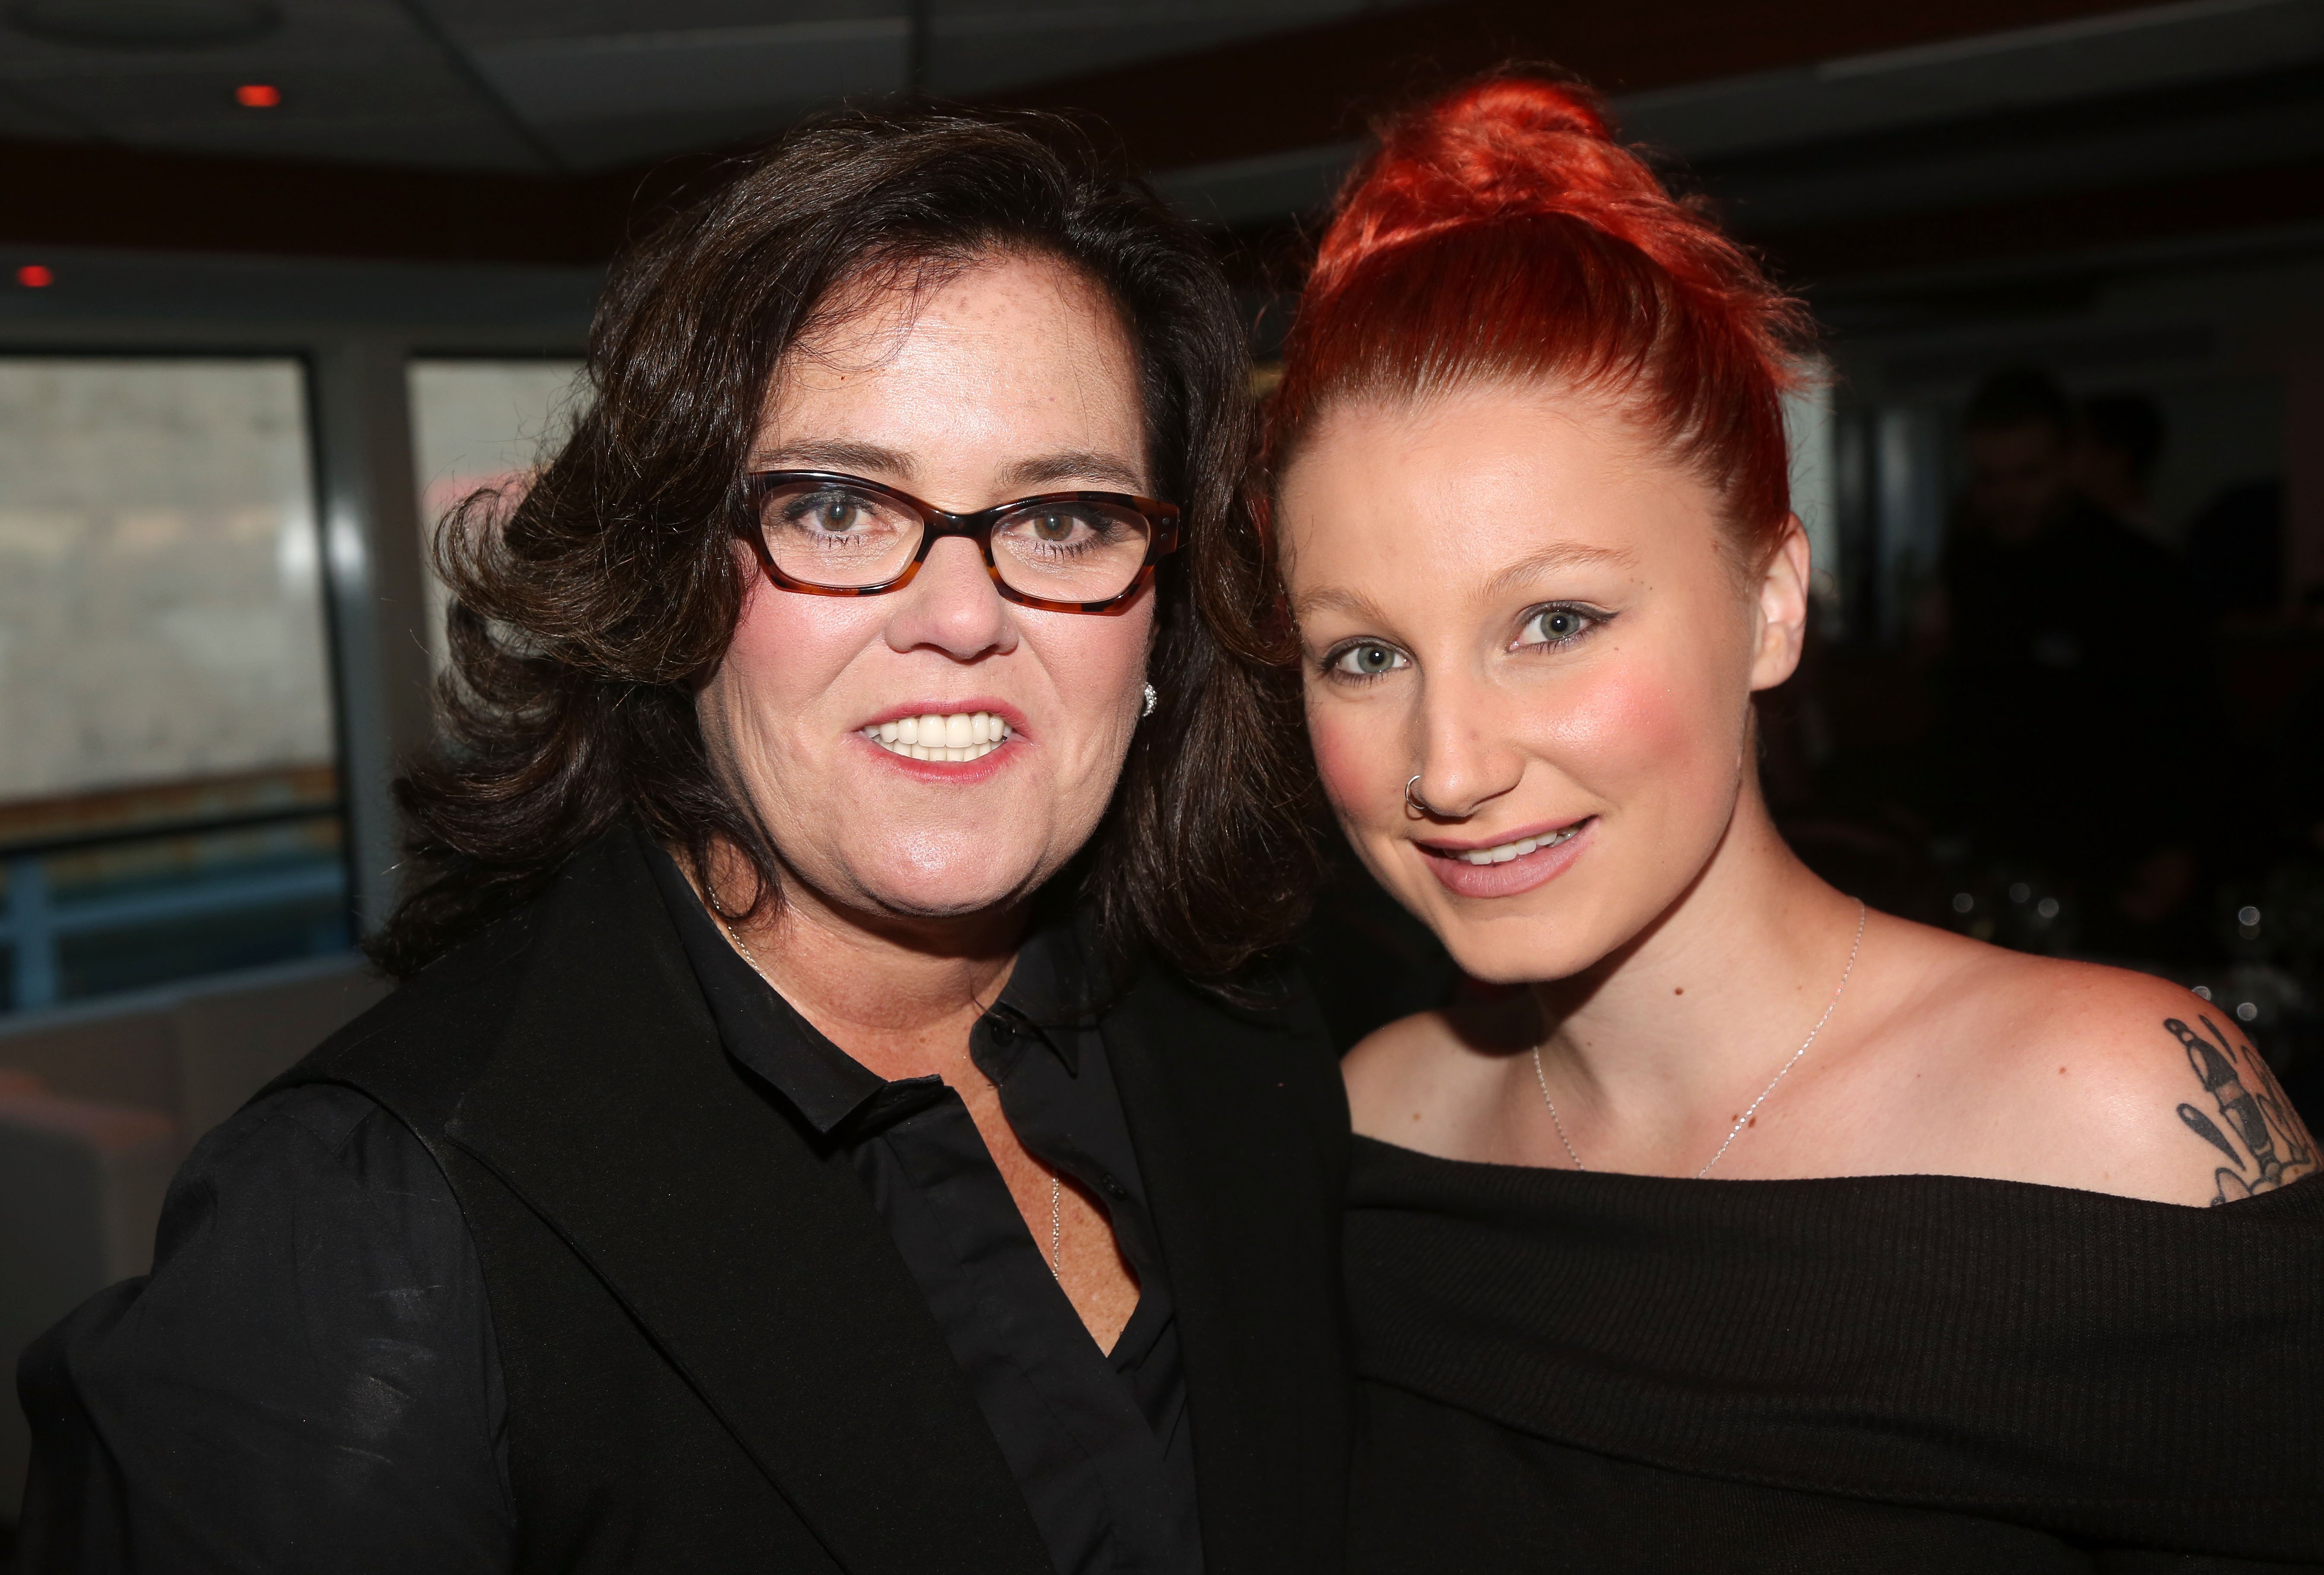 Comedian Rosie O'Donnell and her daughter Chelsea Belle O'Donnell posing at the "2nd Annual Fran Drescher Cancer Schmancer Sunset Cabaret Cruise" on The SS Hornblower Infinity Crusie Ship on June 20, 2016 in New York City. | Source: Getty Images